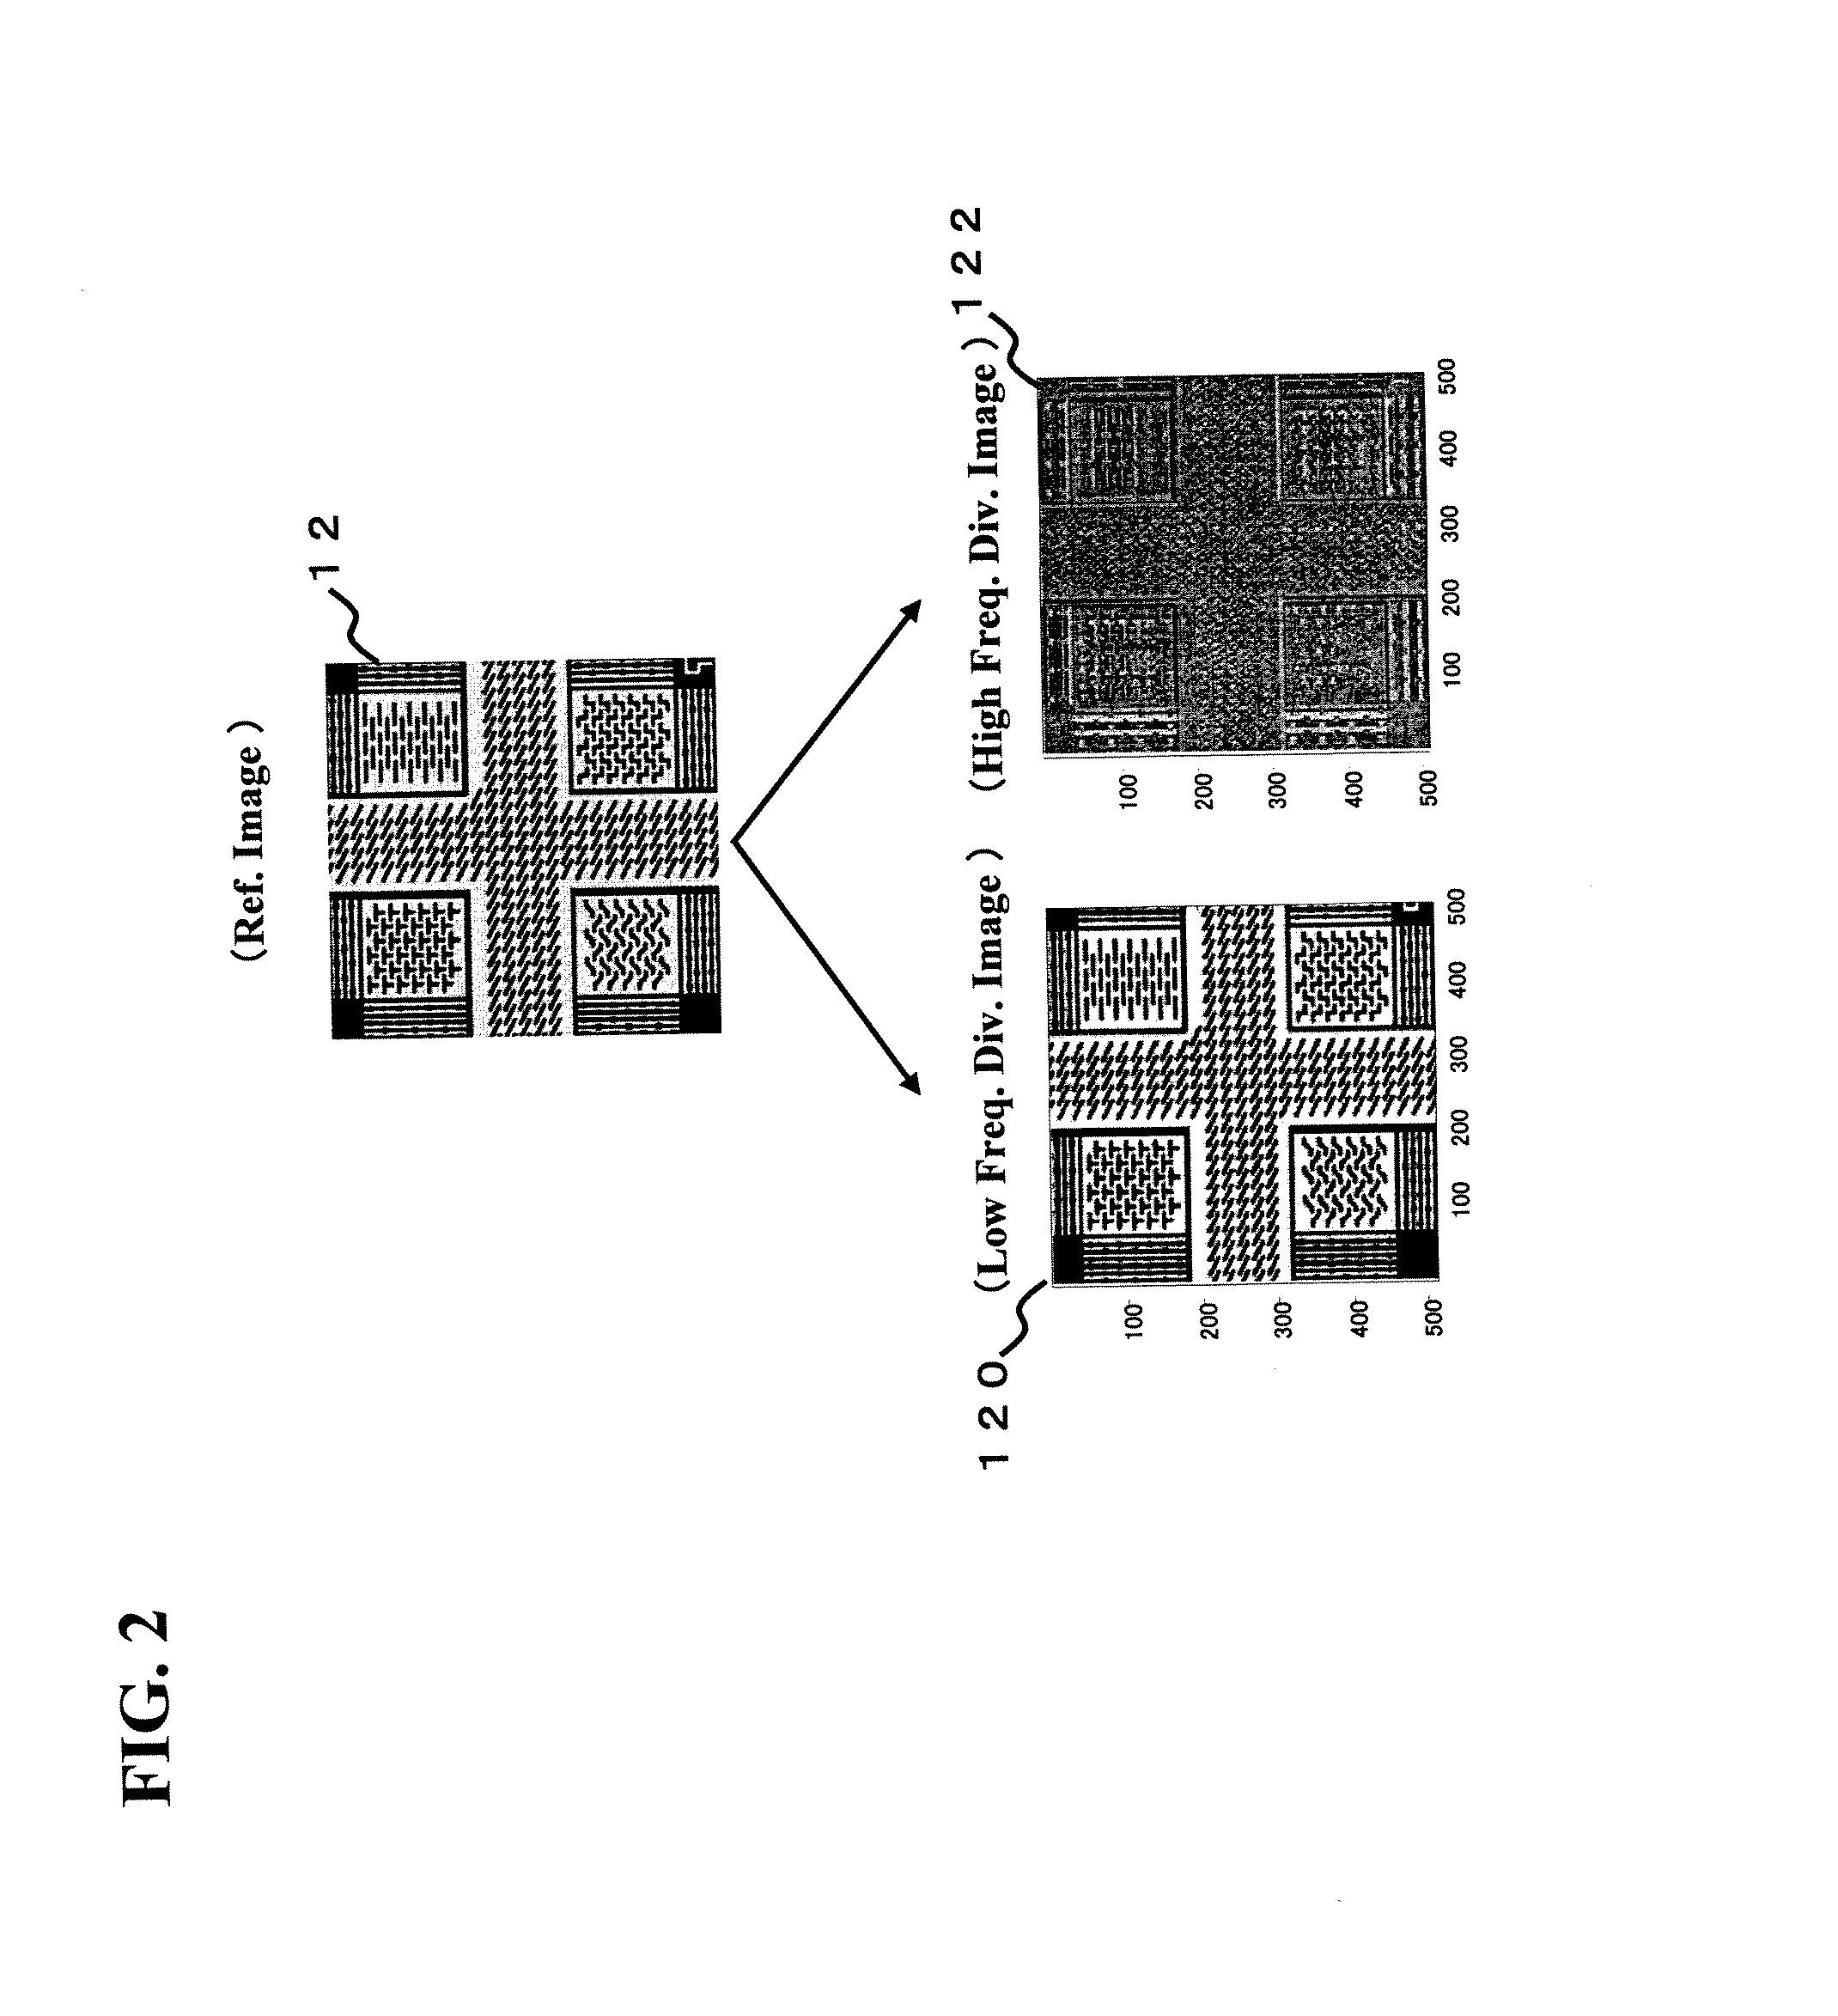 Image correction method and apparatus for use in pattern inspection system